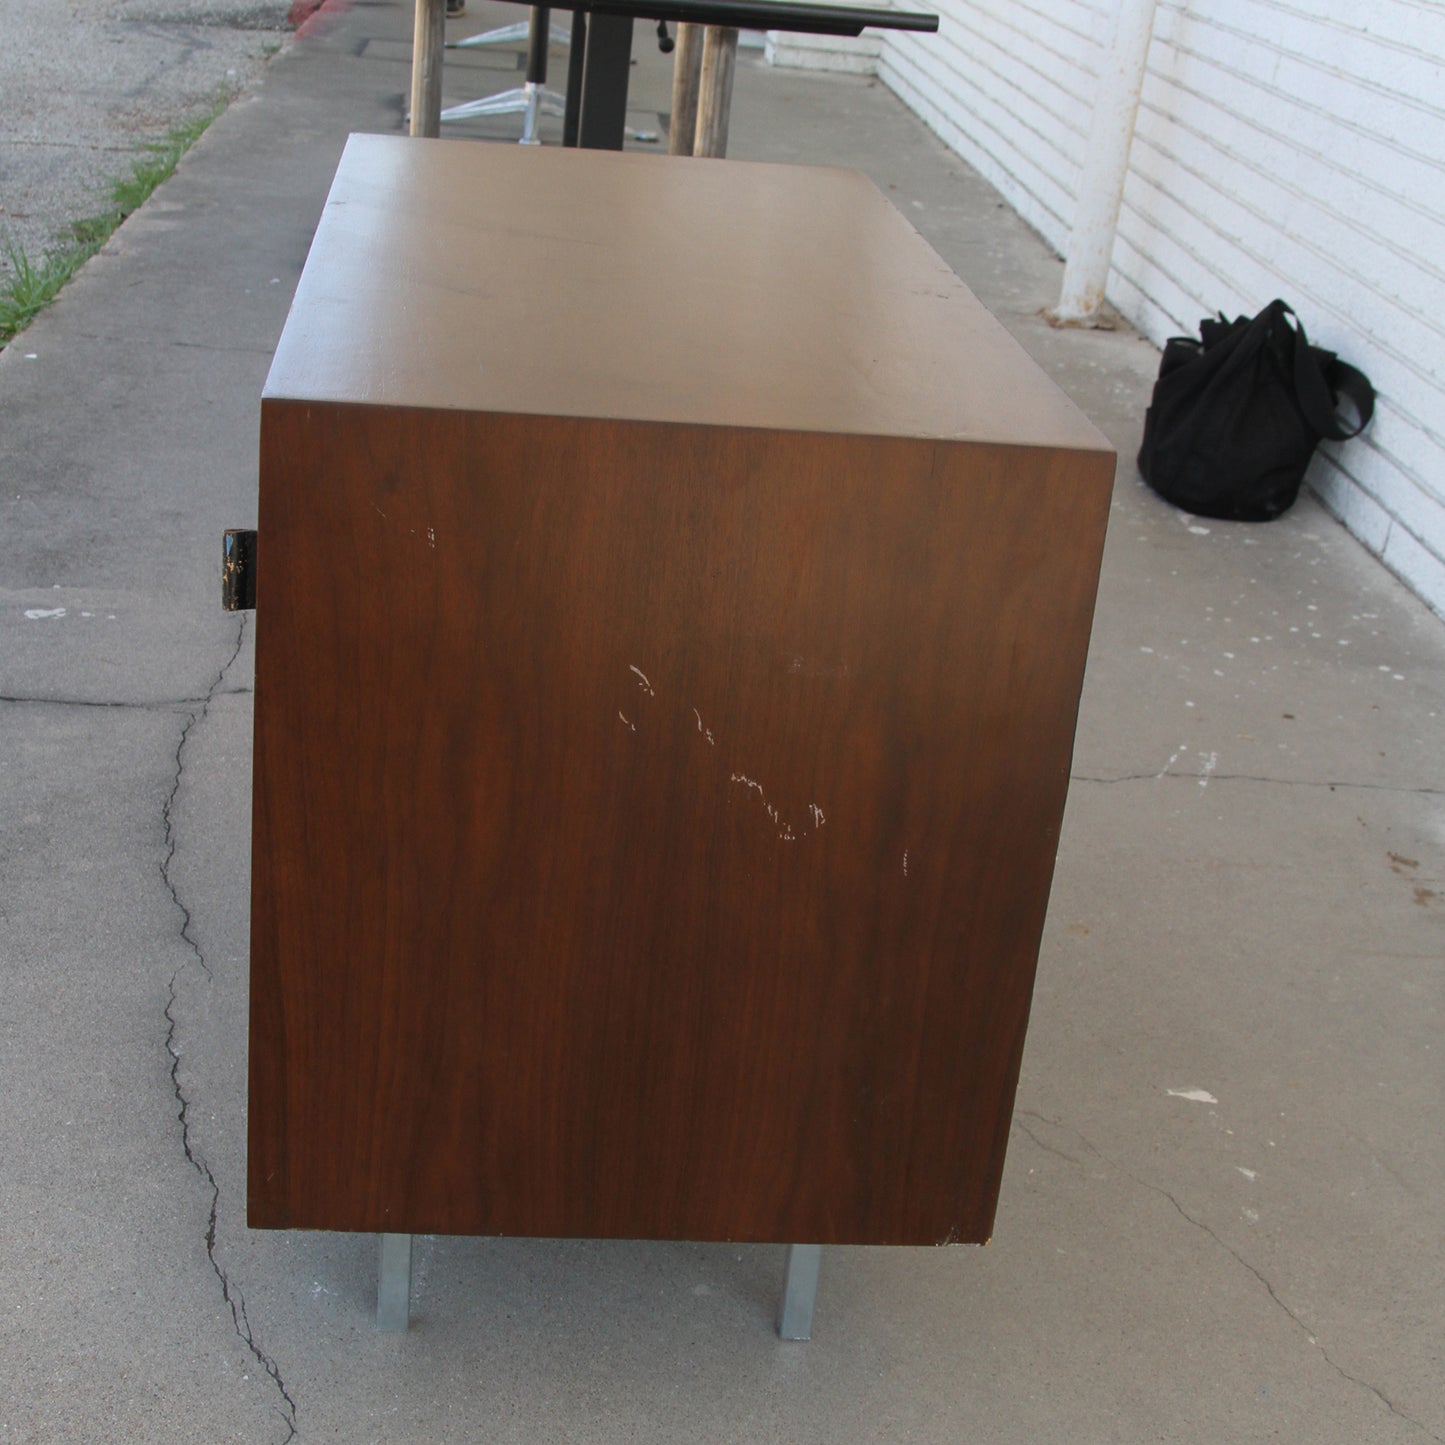 Knoll Credenza with Luxurious Leather Top and Cabinet Handles.